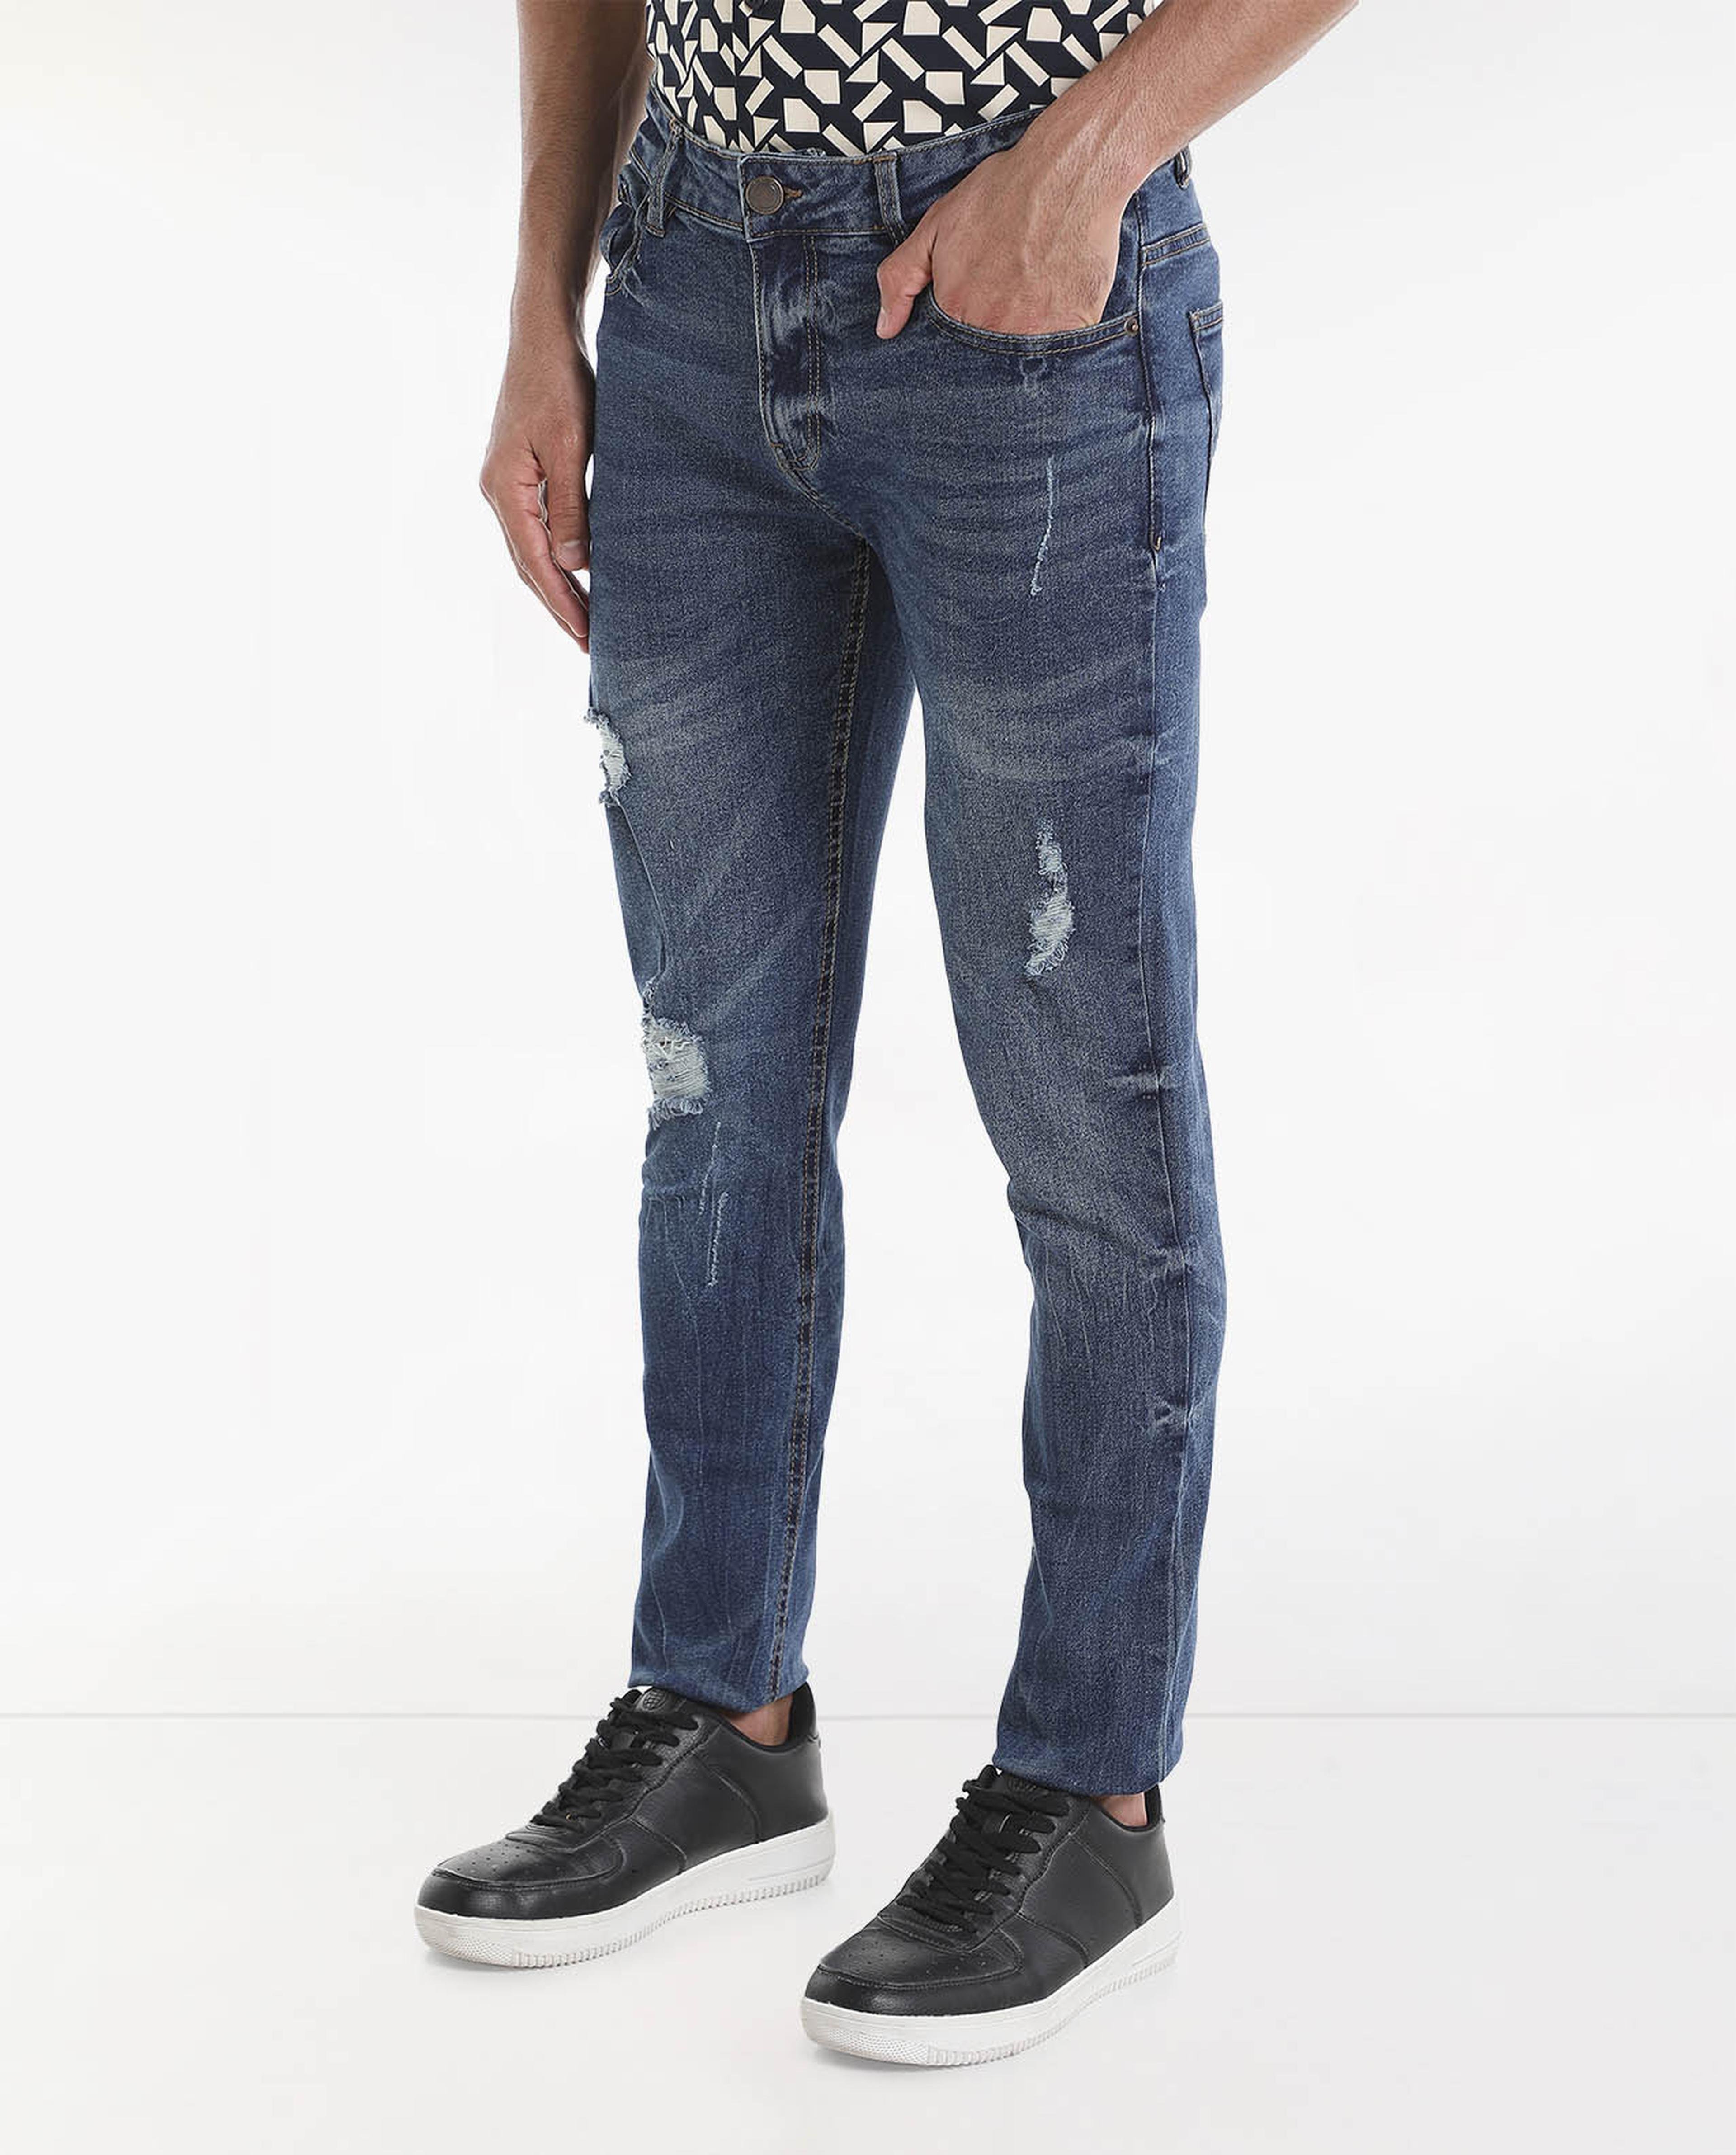 Light Faded Mildly Distressed Mid-Rise Jeans with Button Closure